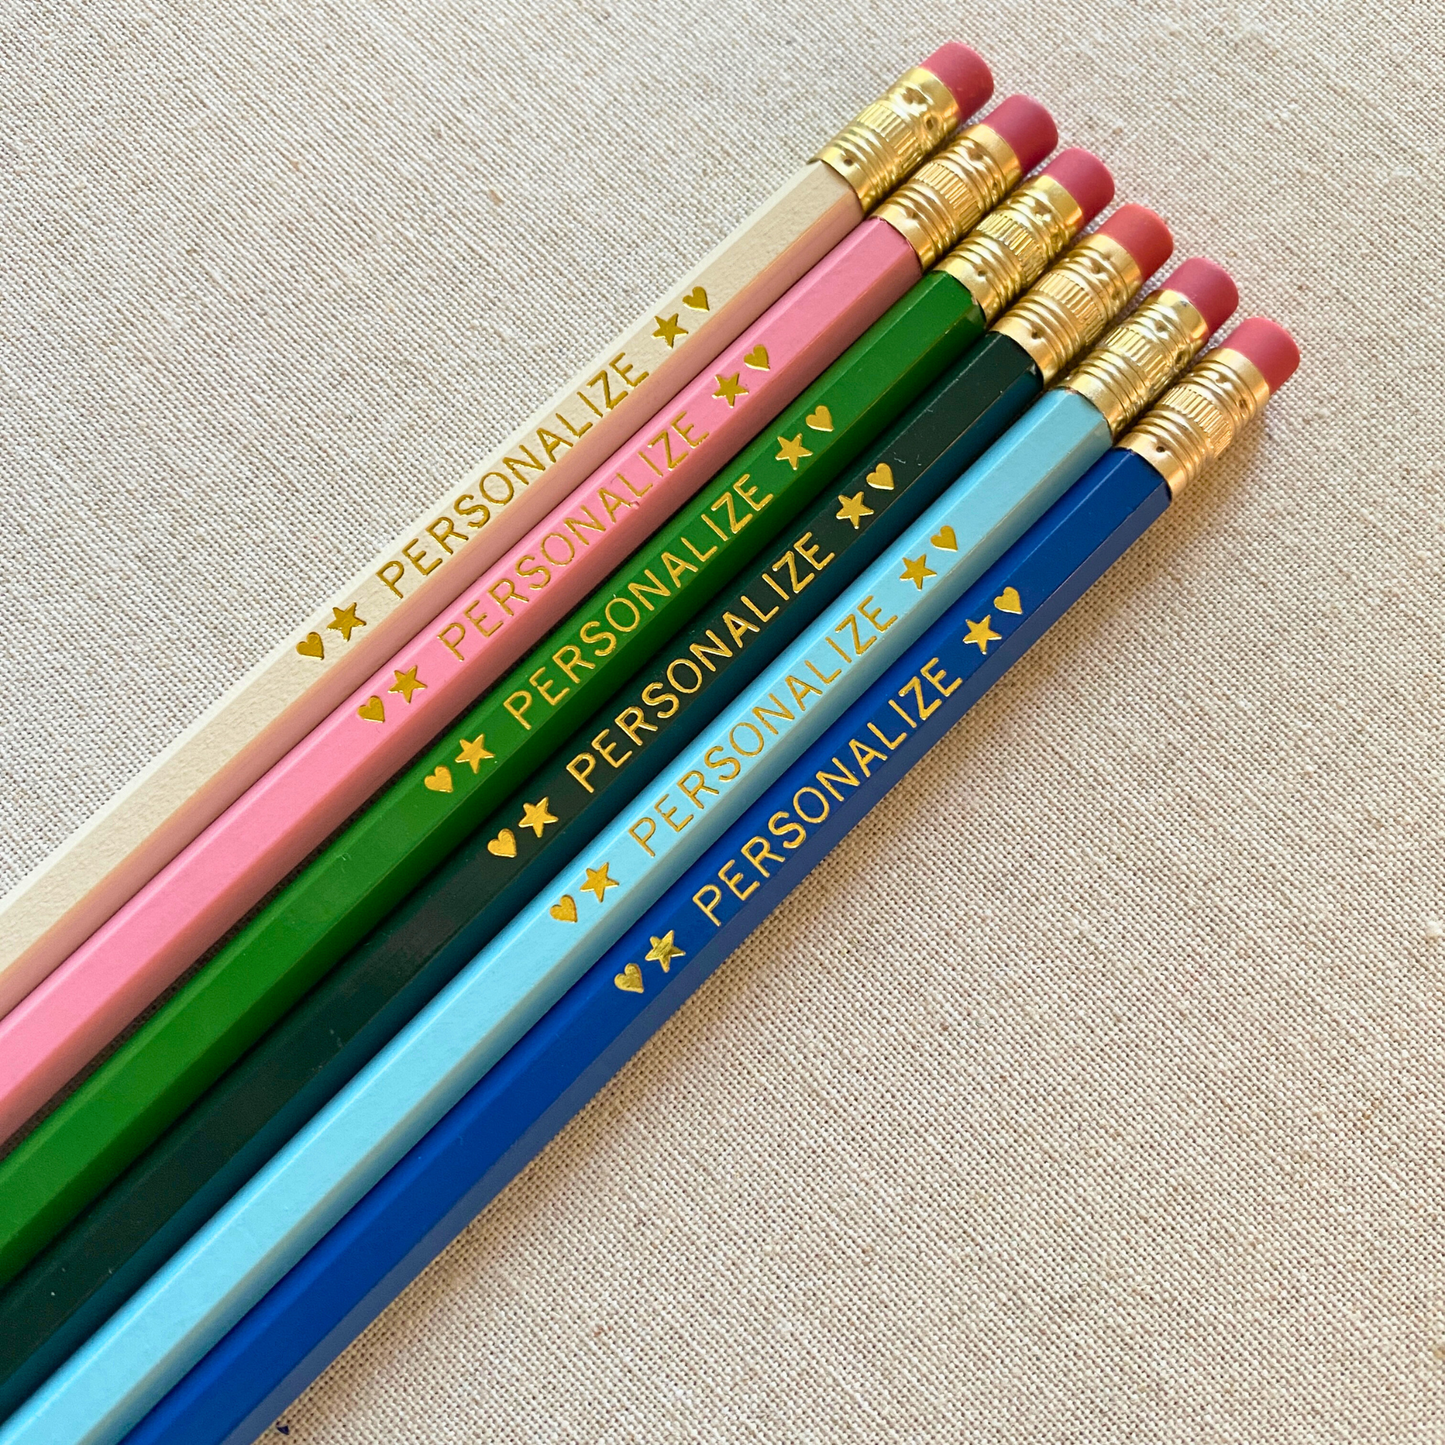 6 Personalized Pencil Set TRANQUIL WATERS